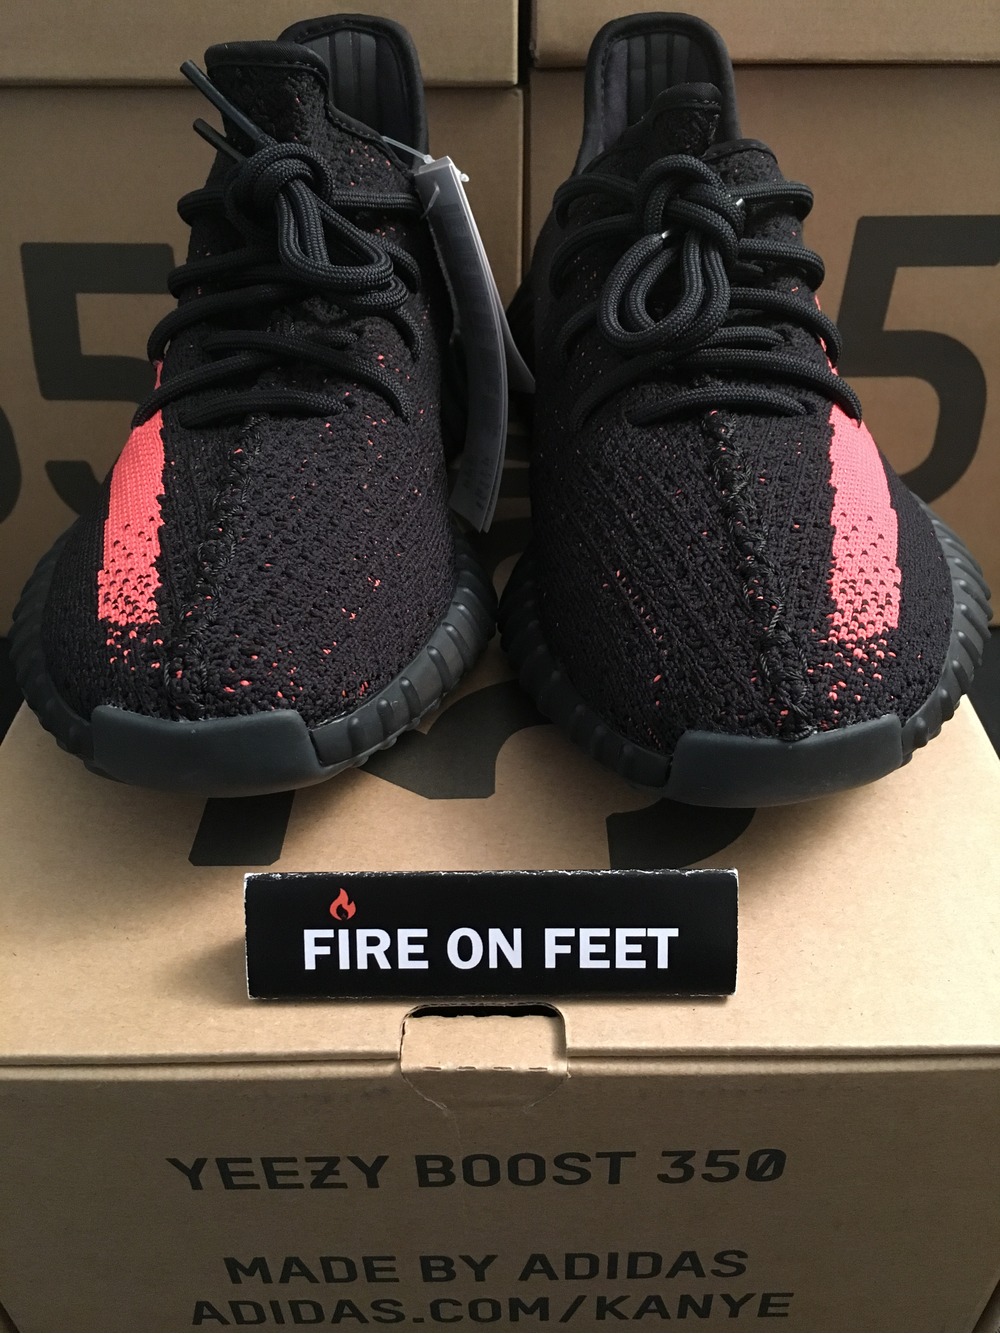 No BOT Needed for BRED! Unboxing Adidas Yeezy Boost 350 V2 